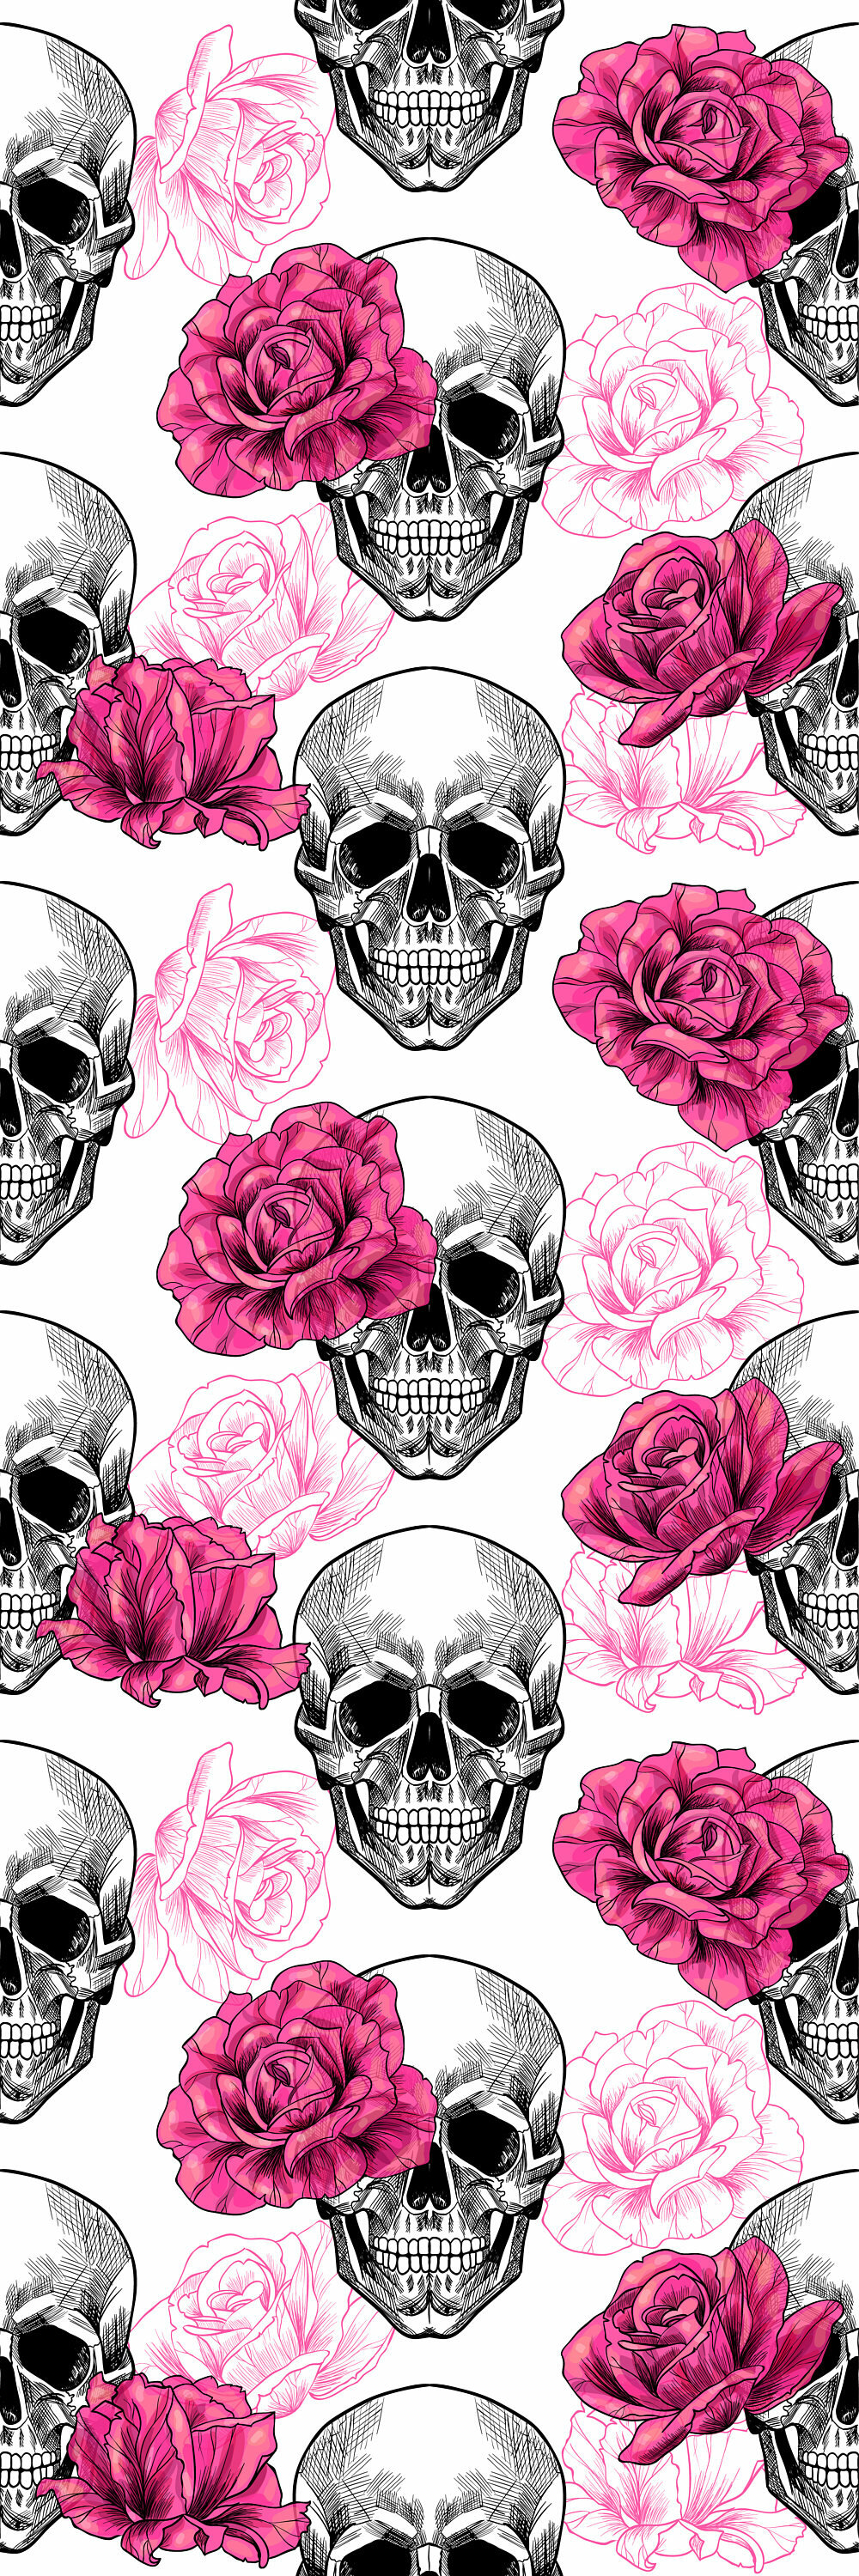 Ebern Designs Solange Removable Skull Roses 6.25' L x 25 W Peel and Stick Wallpaper Roll